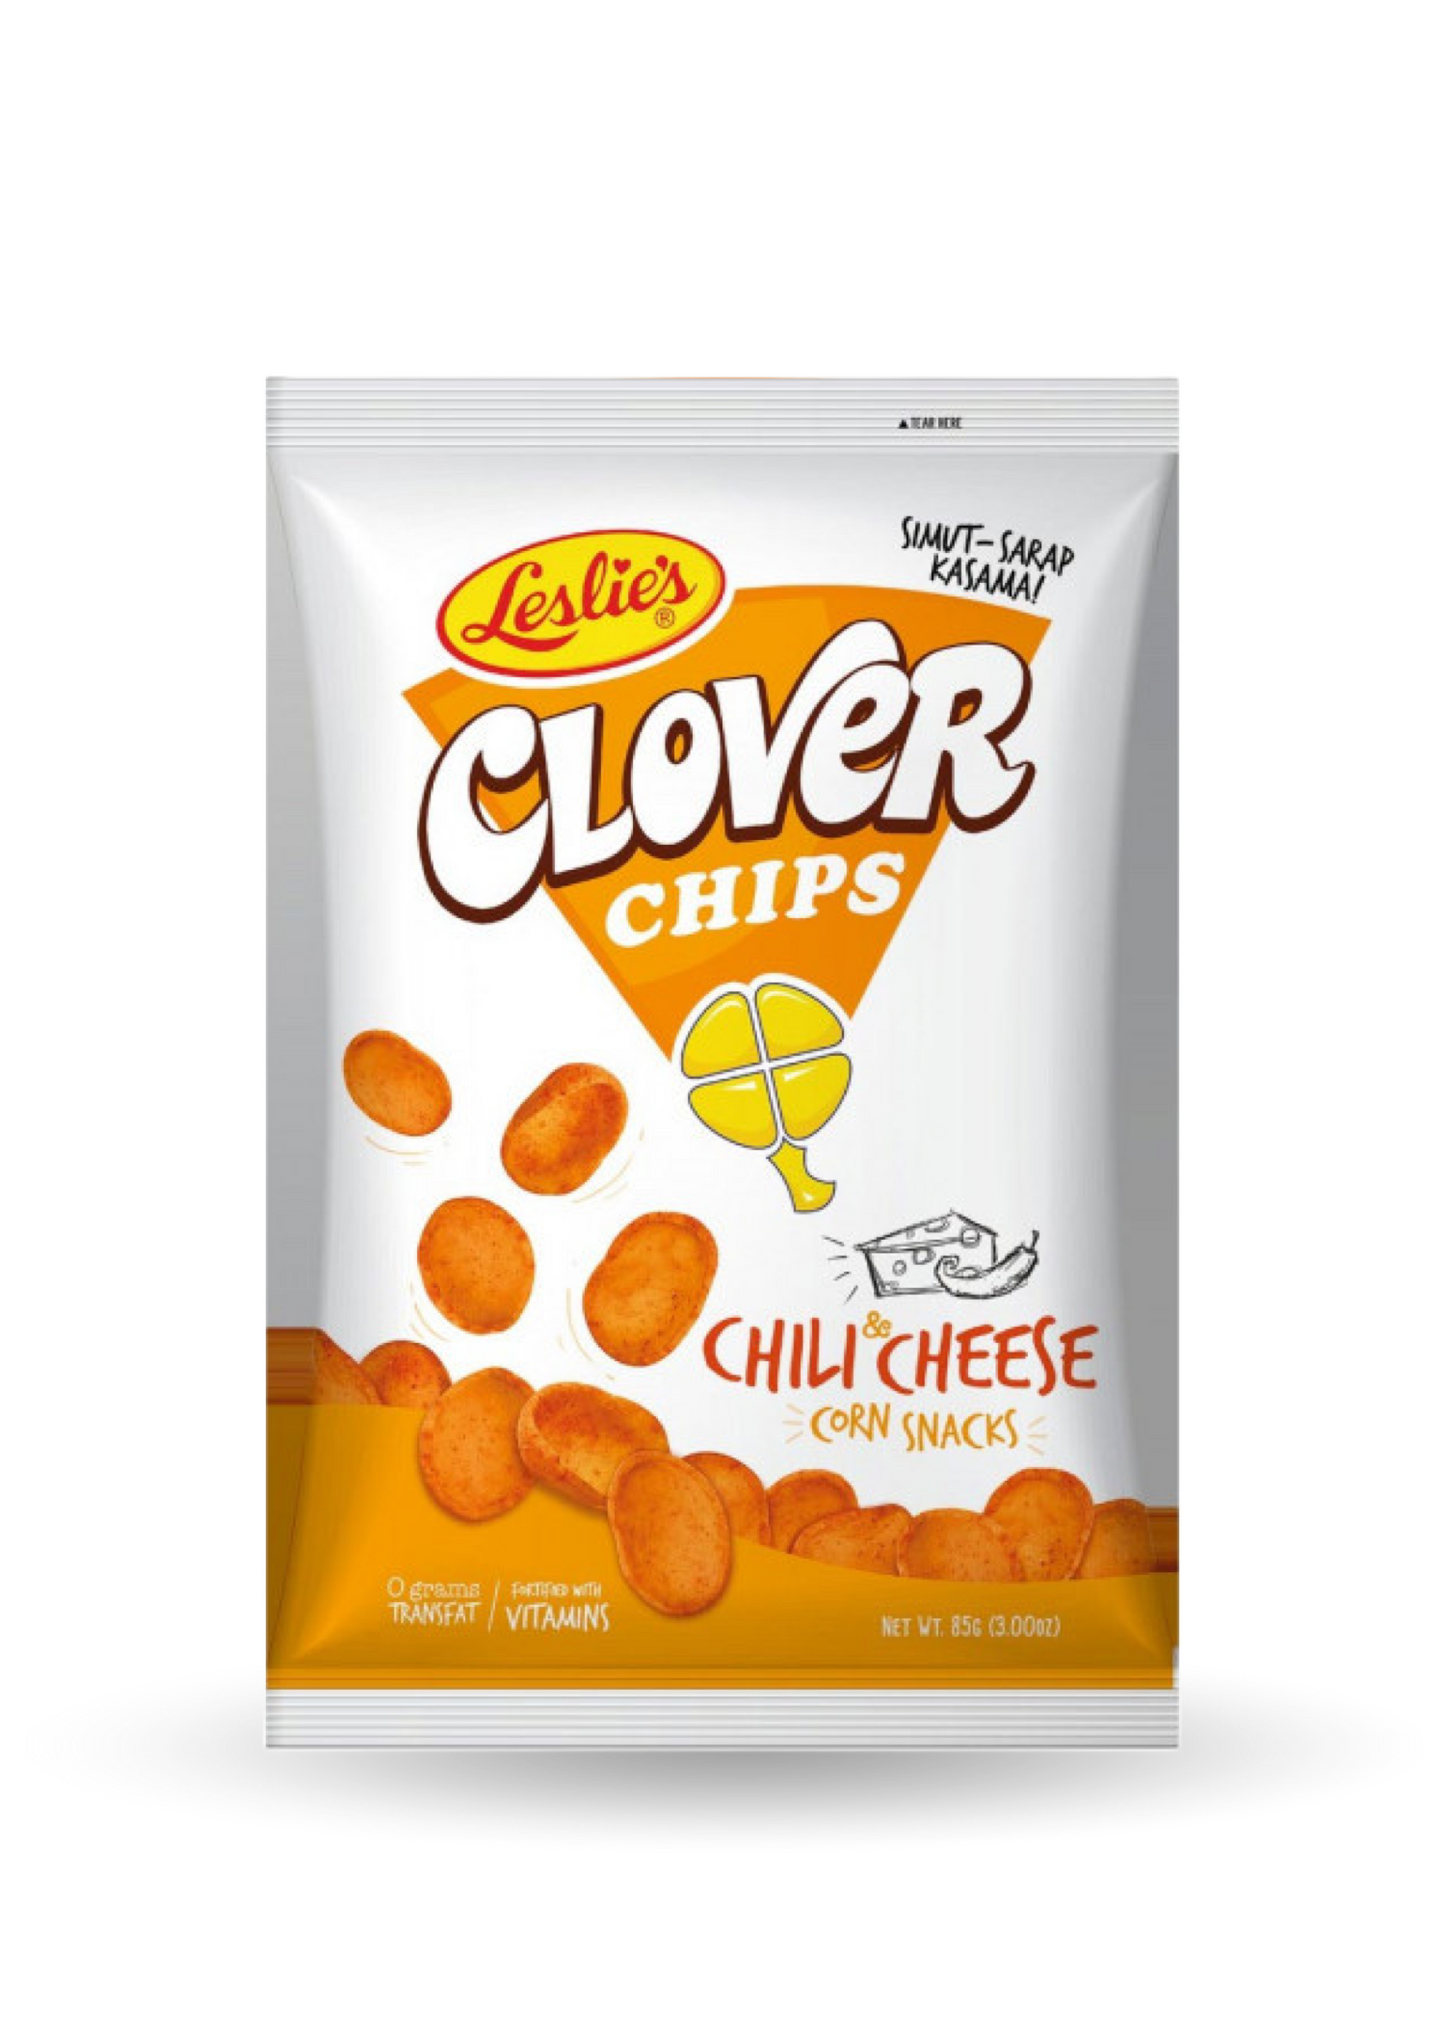 Leslie | Clover Chips | Chili Cheese